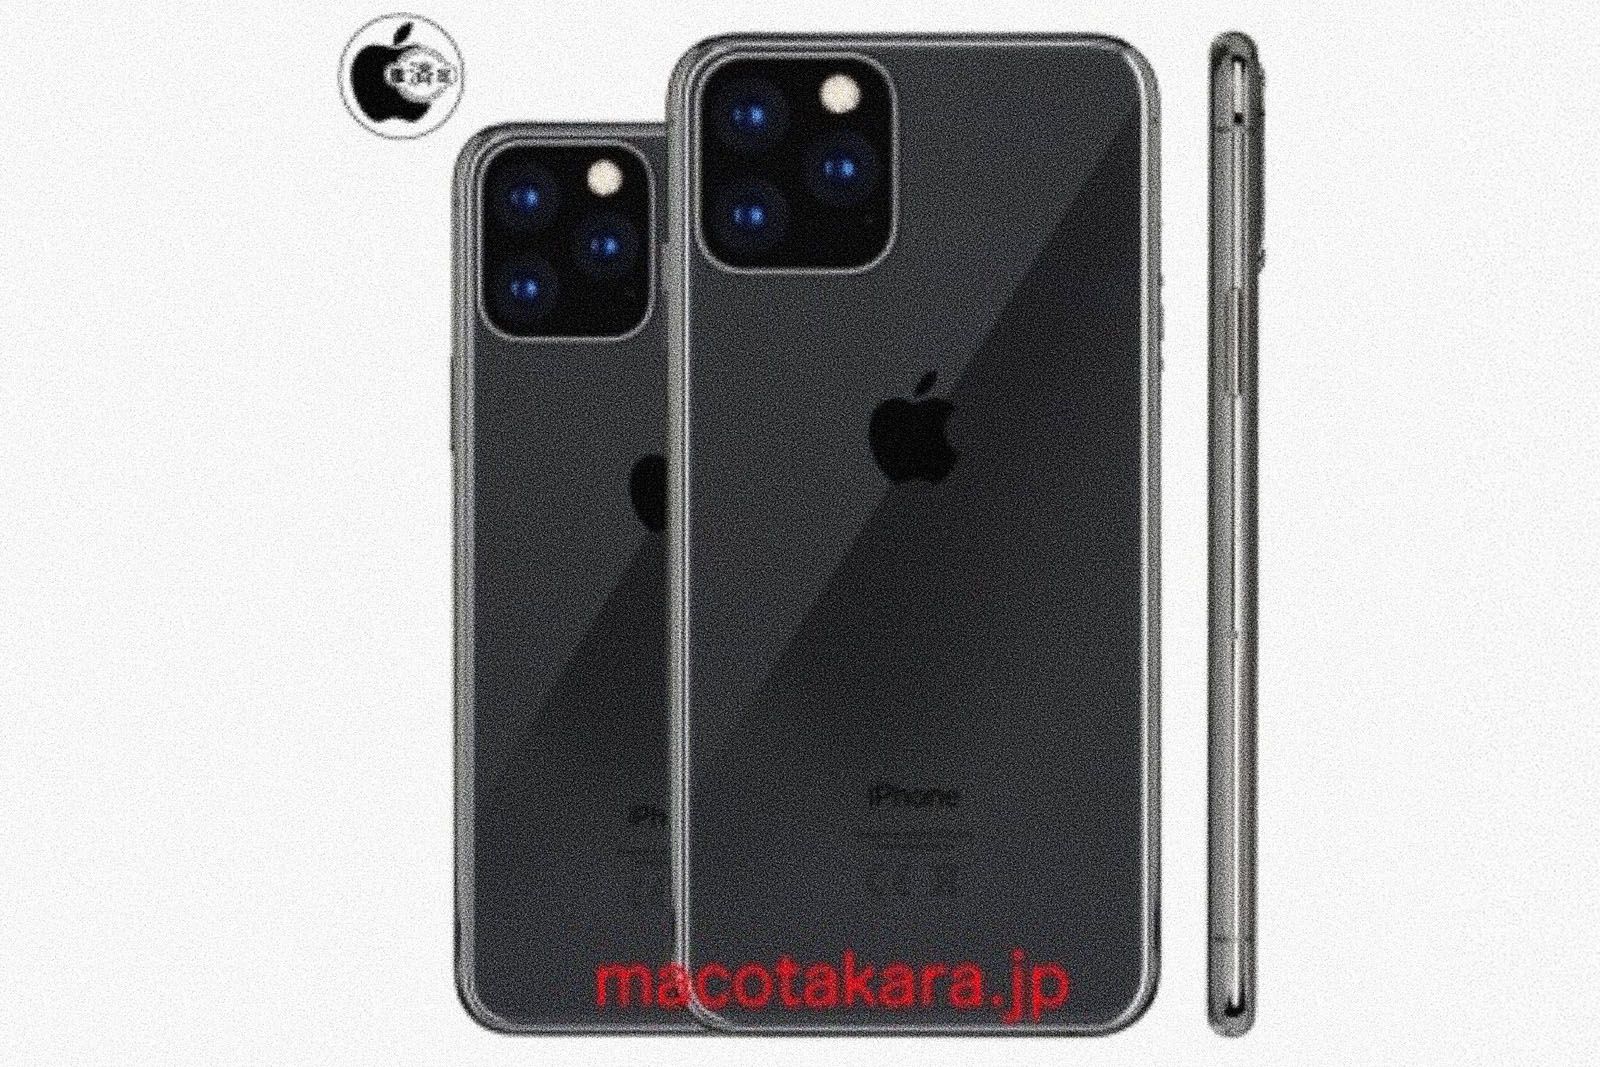 Two iPhone XI models reported 61-inch and 65-inch OLED screens triple camera image 1